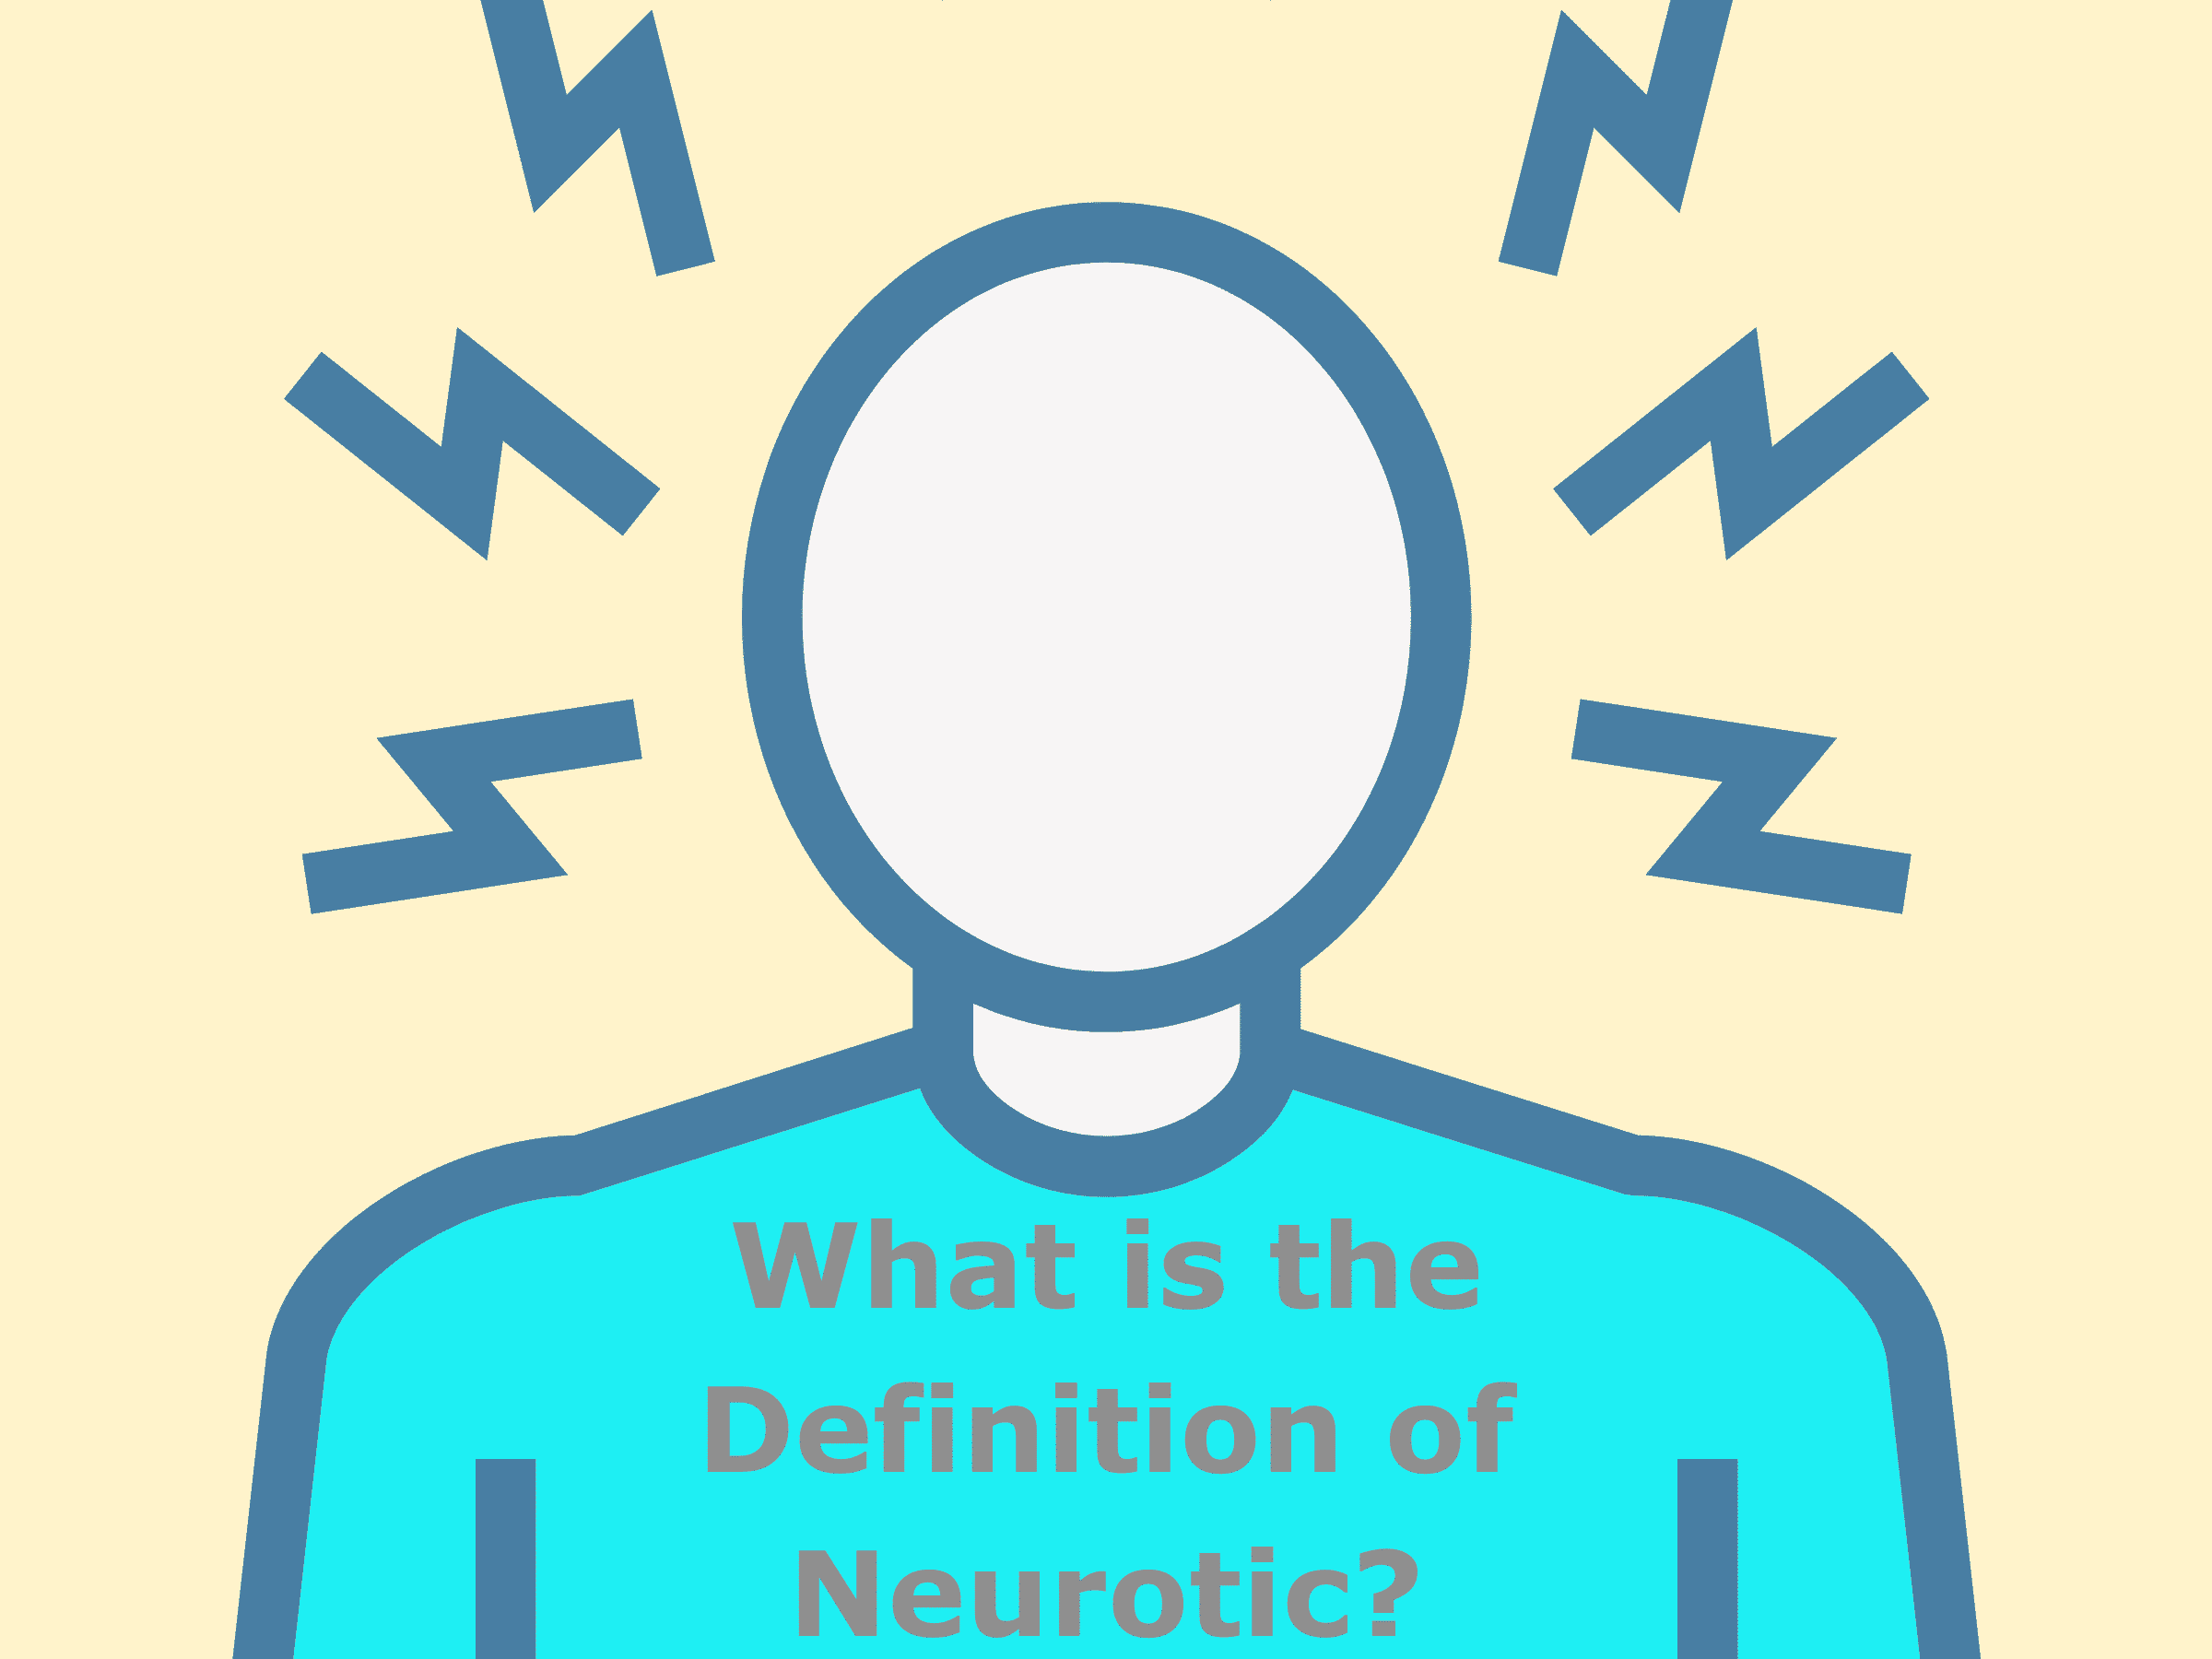 What is the Definition of Neurotic?